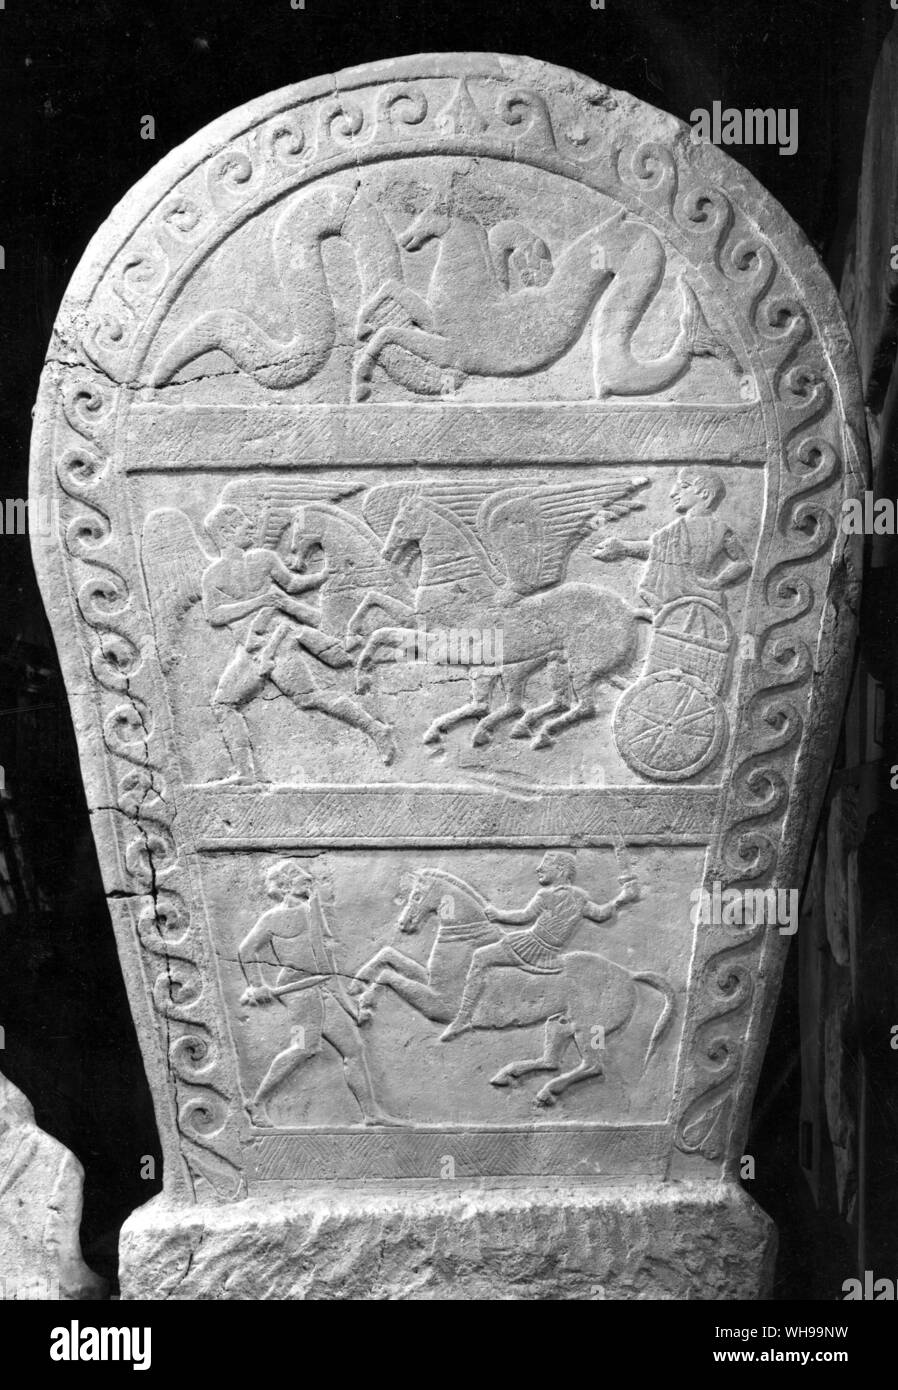 A plaque showing the deceased riding through the Underworld in a chariot. the scene below represents him as a cavalryman fighting a gaul on foot Stock Photo